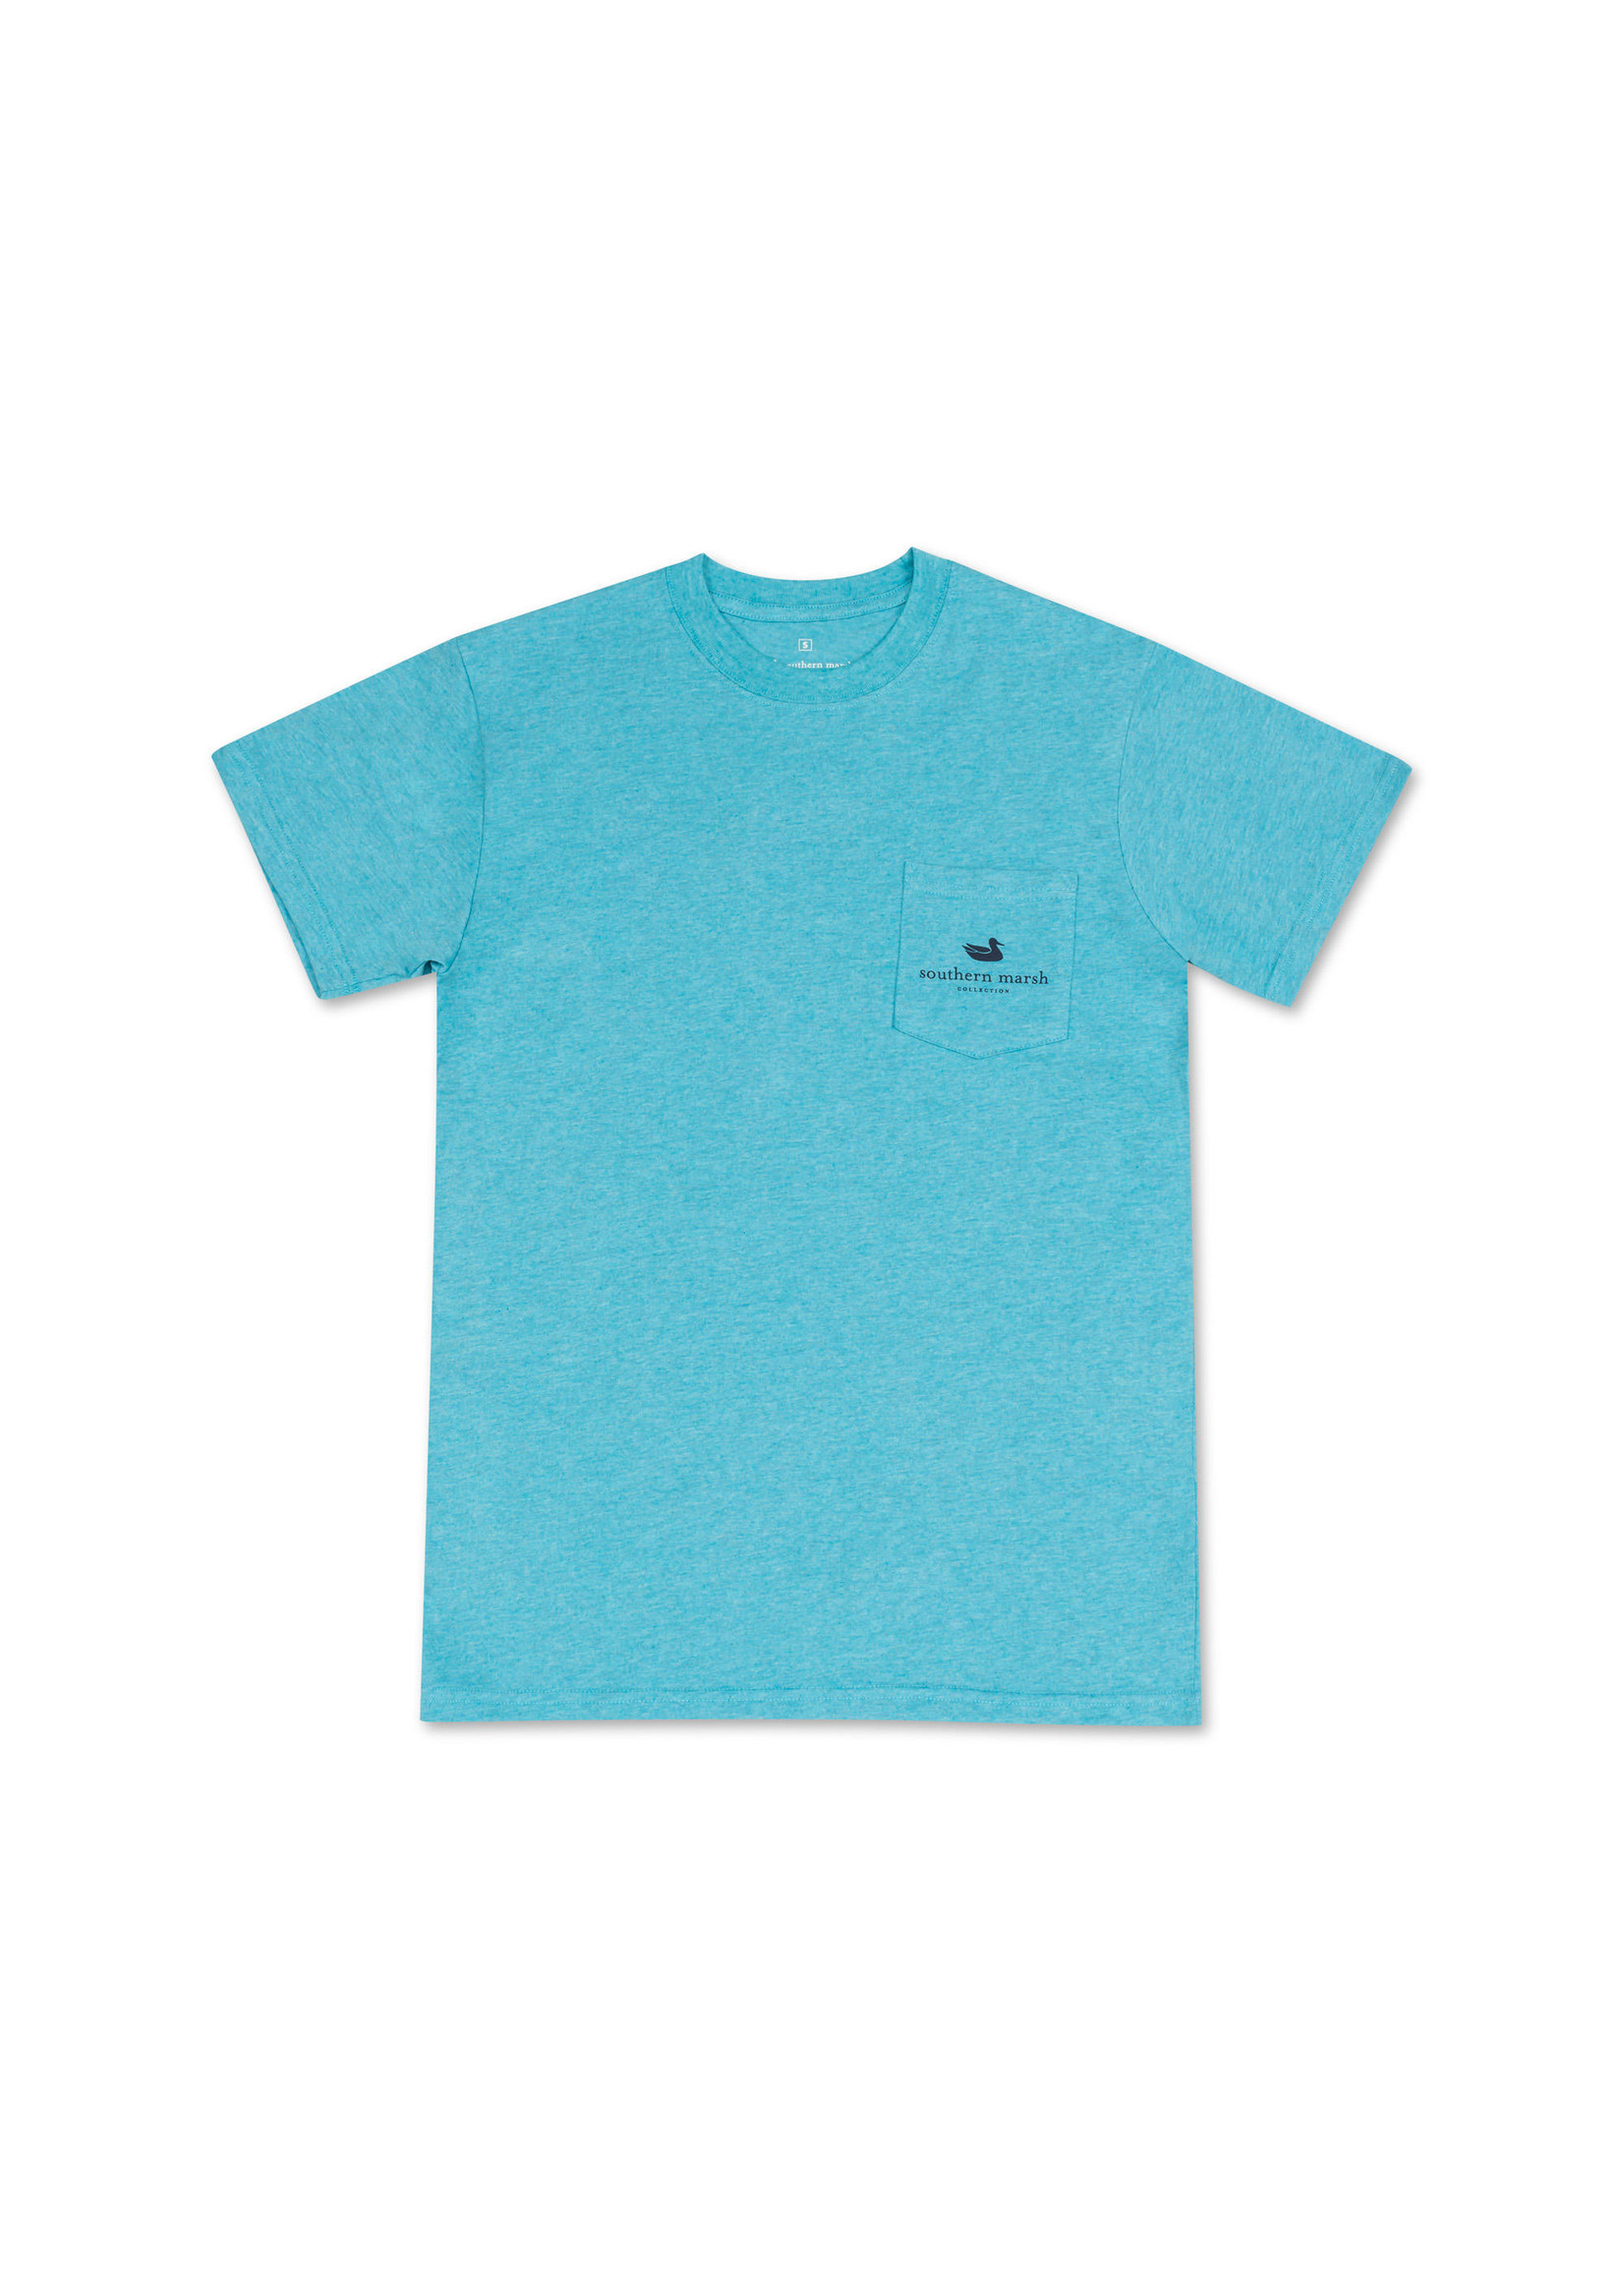 Southern Marsh Impressions Tee - Oyster